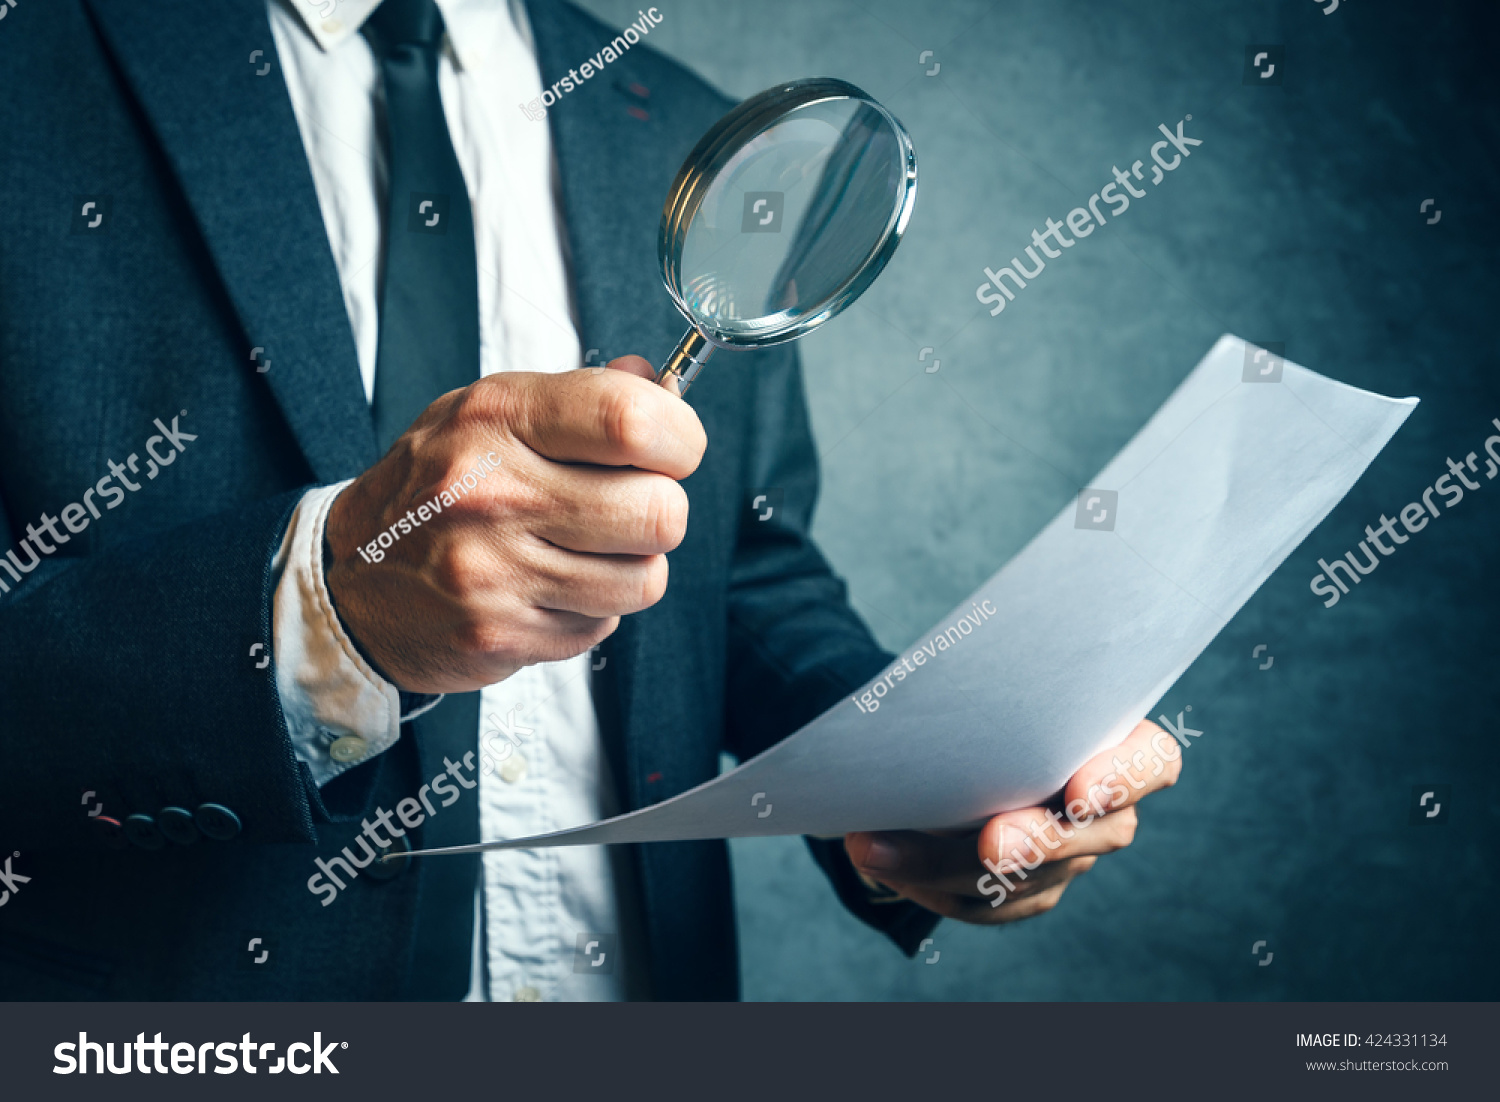 Tax inspector investigating offshore company documents and papers with magnifying glass, forensic accounting concept #424331134